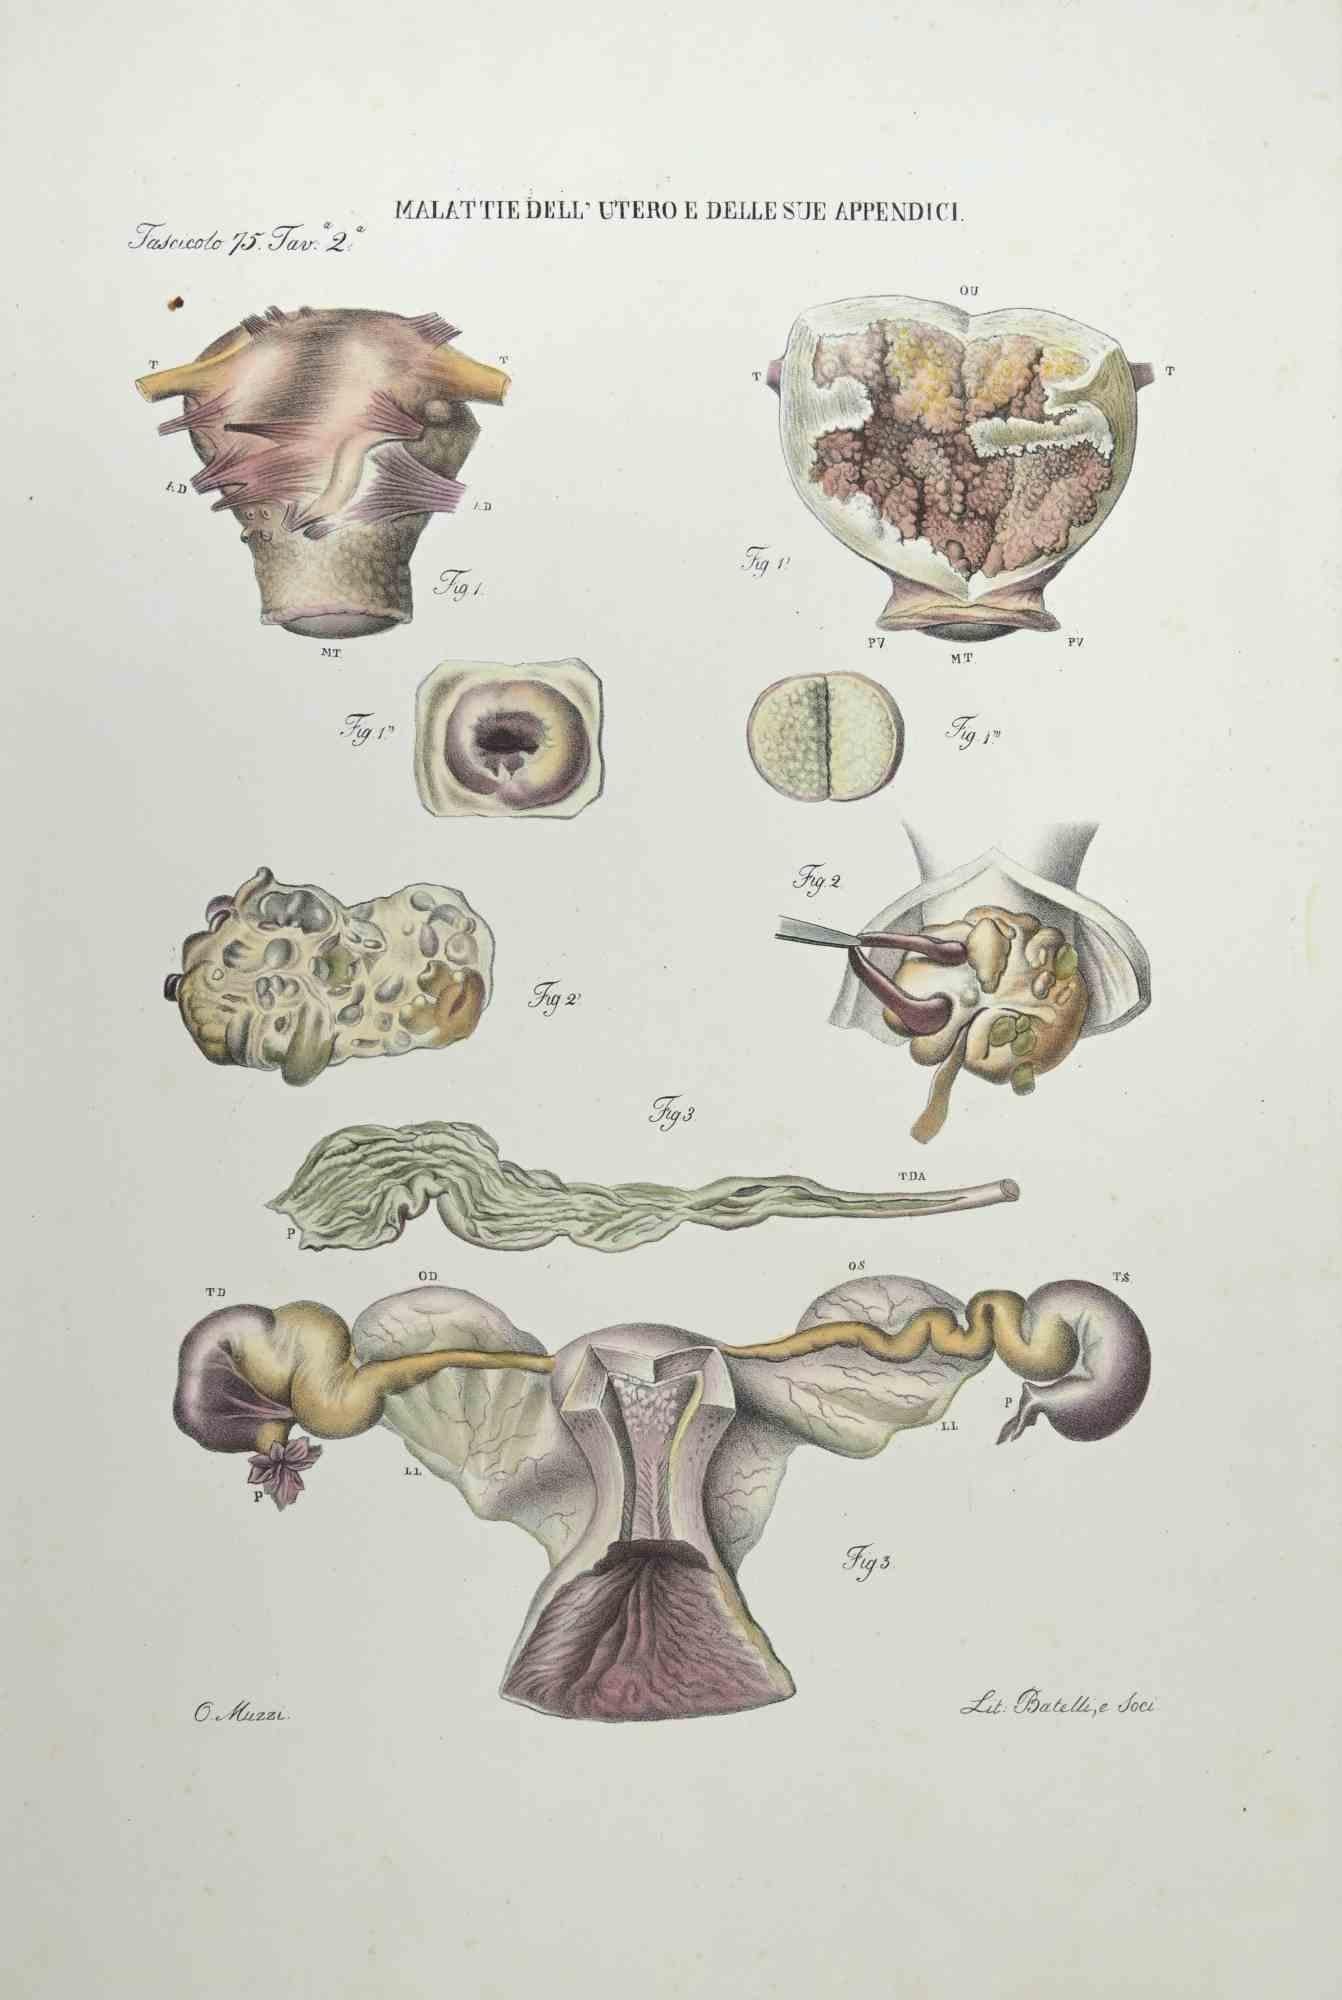 Diseases of the Uterus and its Appendages - Lithograph By Ottavio Muzzi - 1843